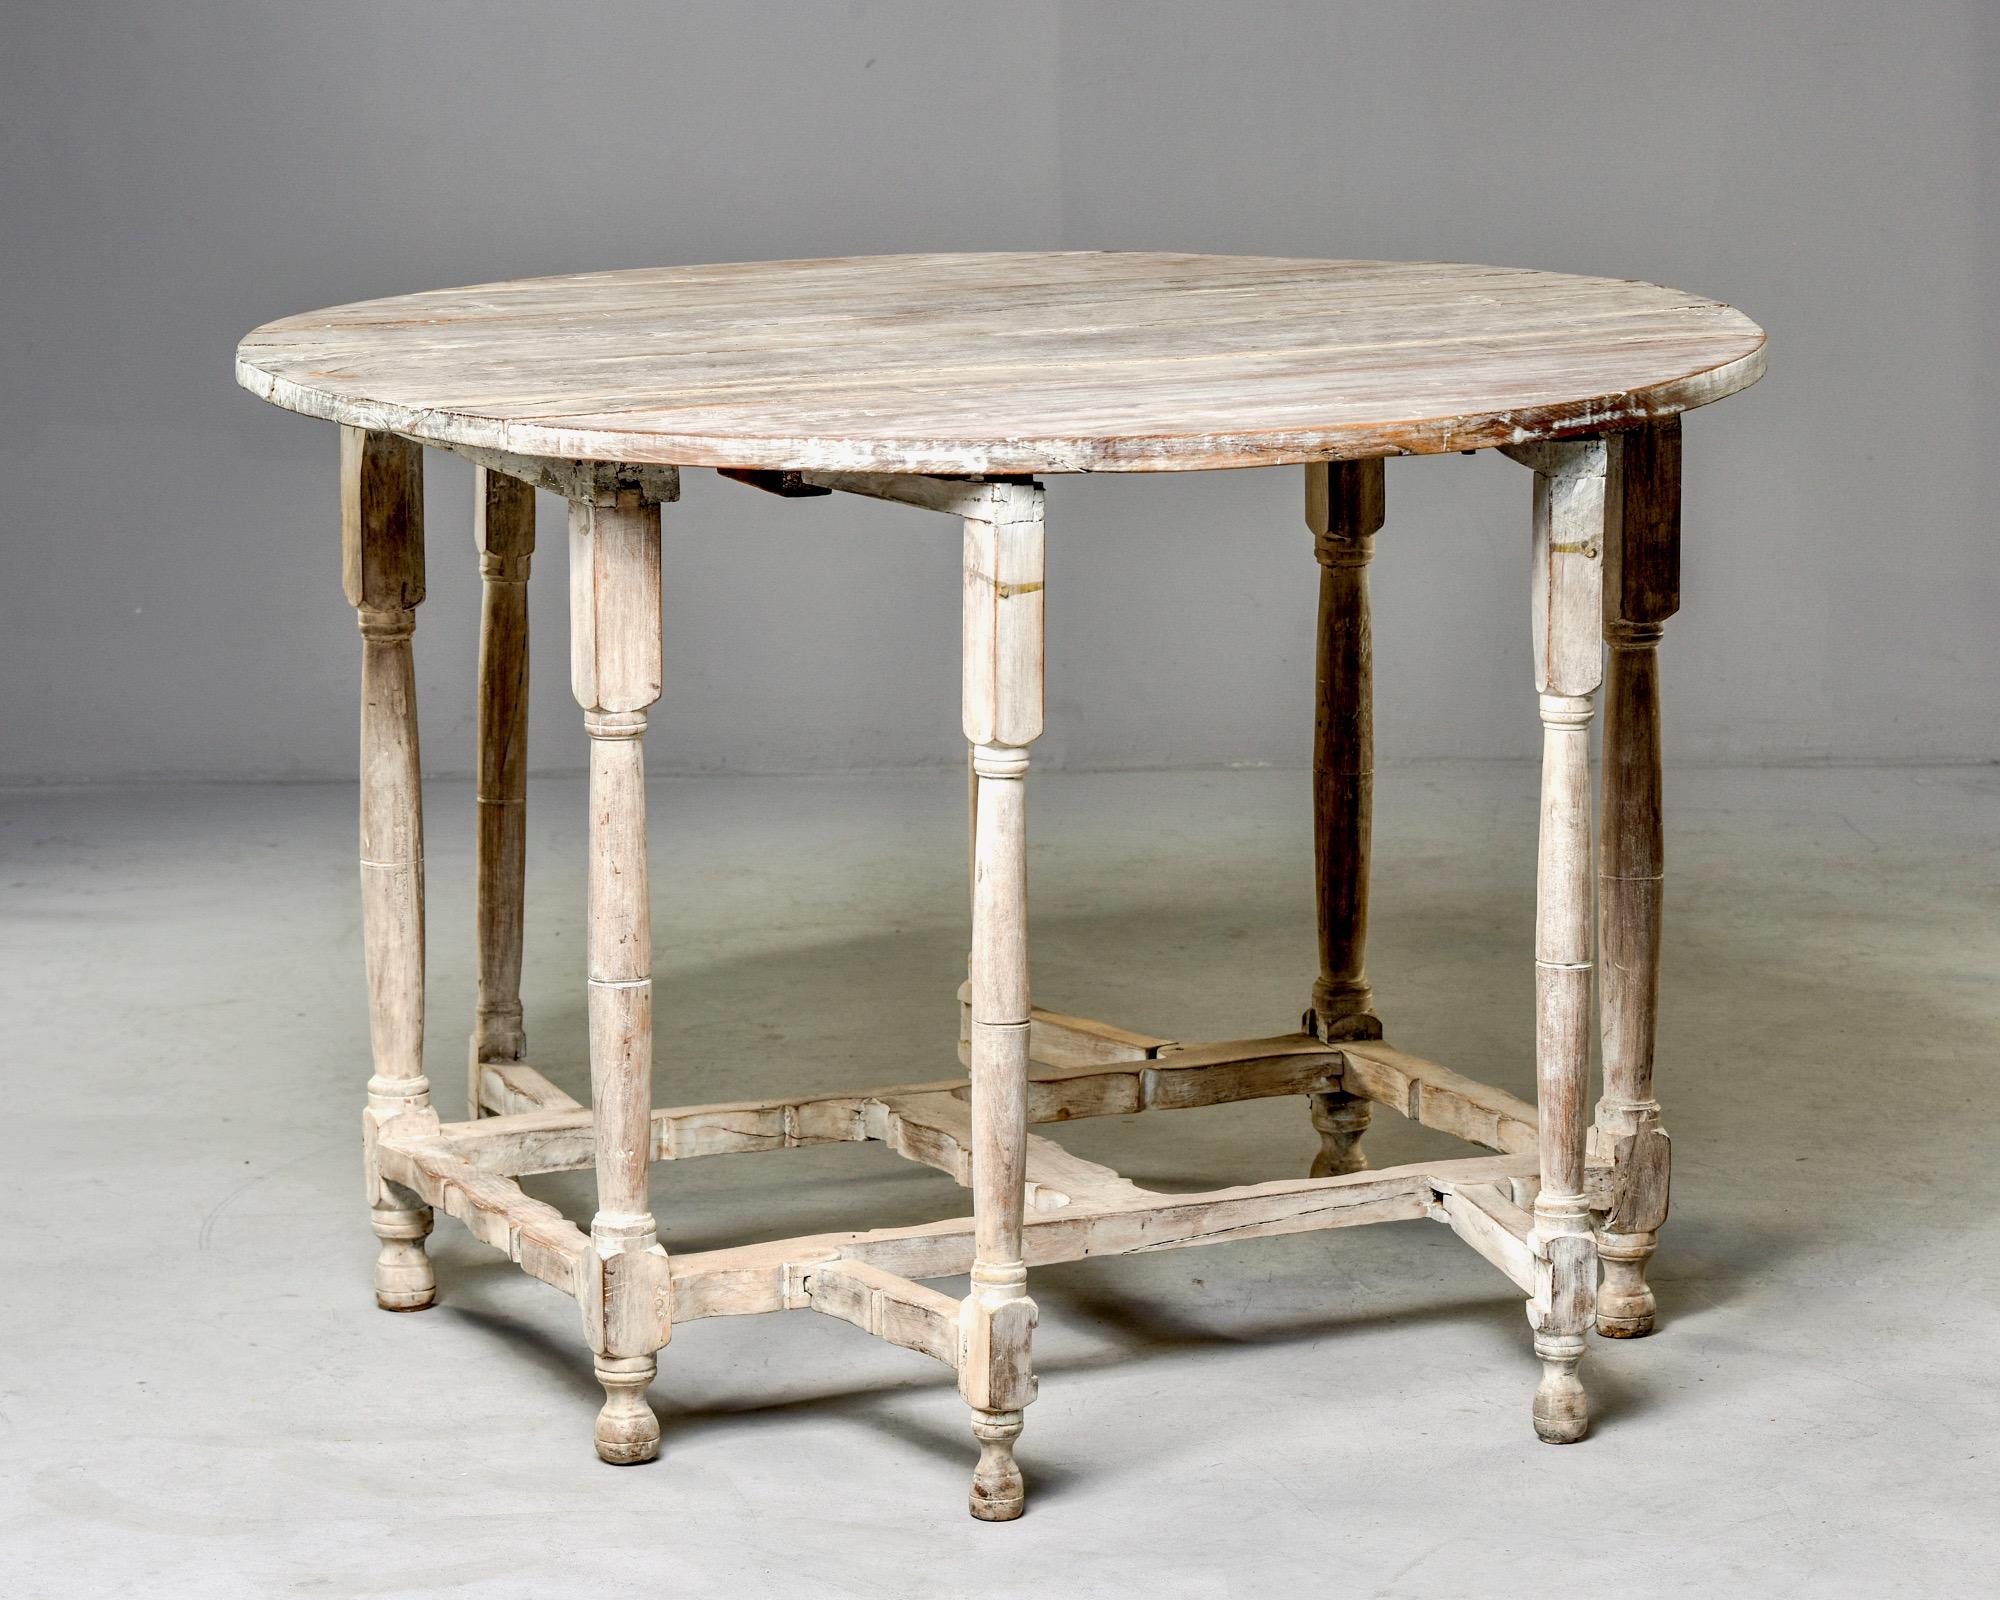 English gate leg oak table with cerused finish, circa 1900s. Measurements shown are with both sides extended. With both sides down, table measures 24.25” deep. Unknow maker.
   